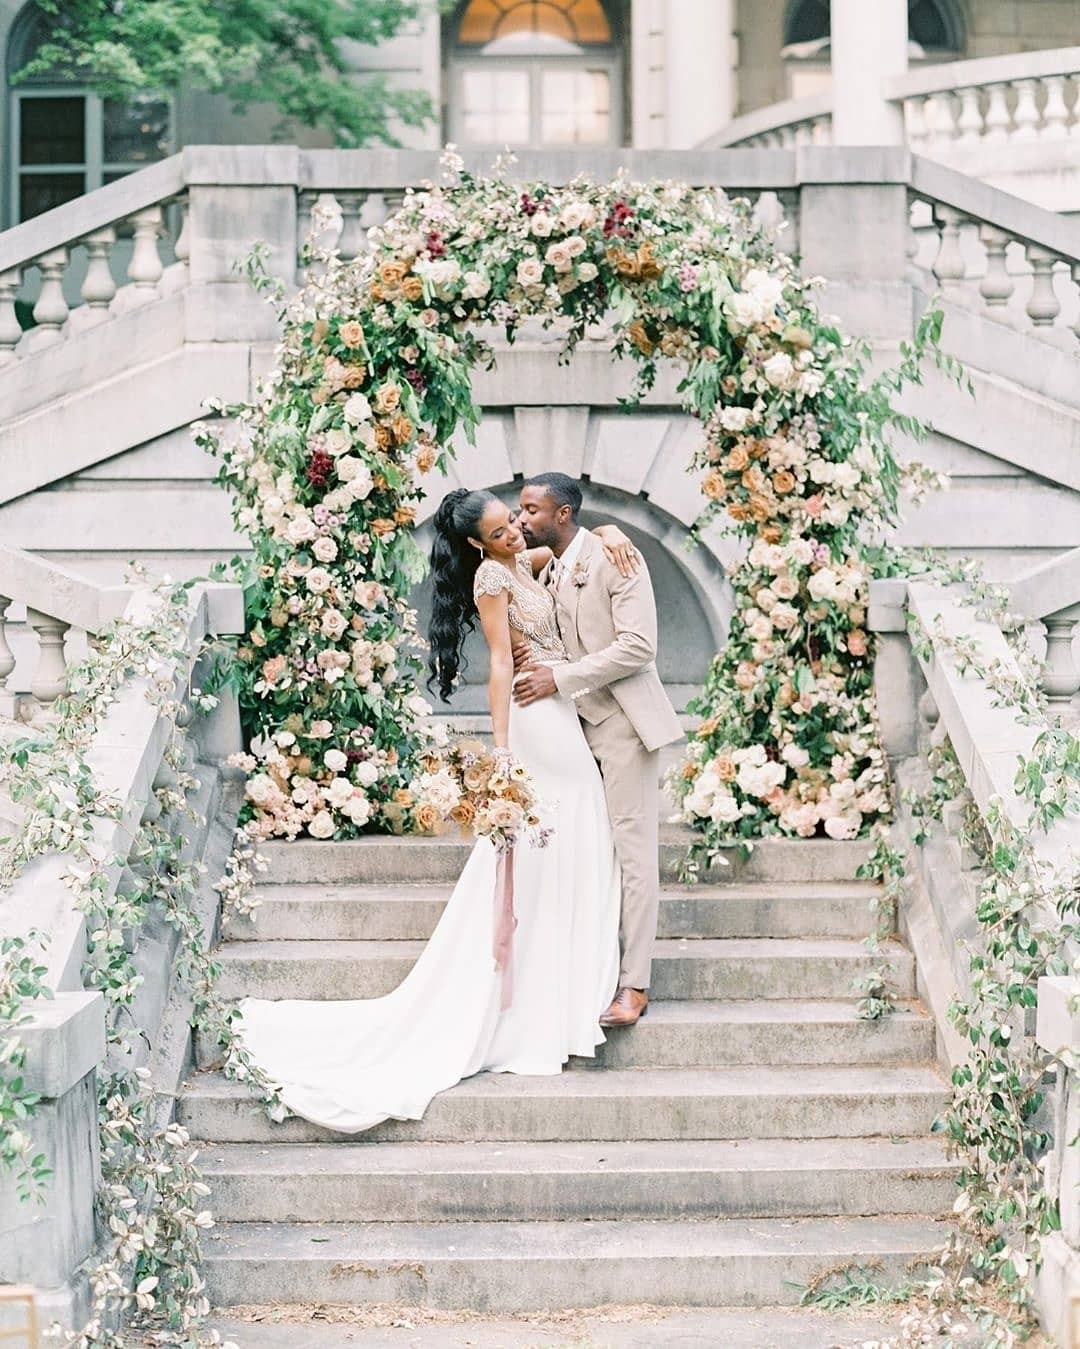 grand staircase with a bride and groom in front of a lush arch with fresh garden flowers